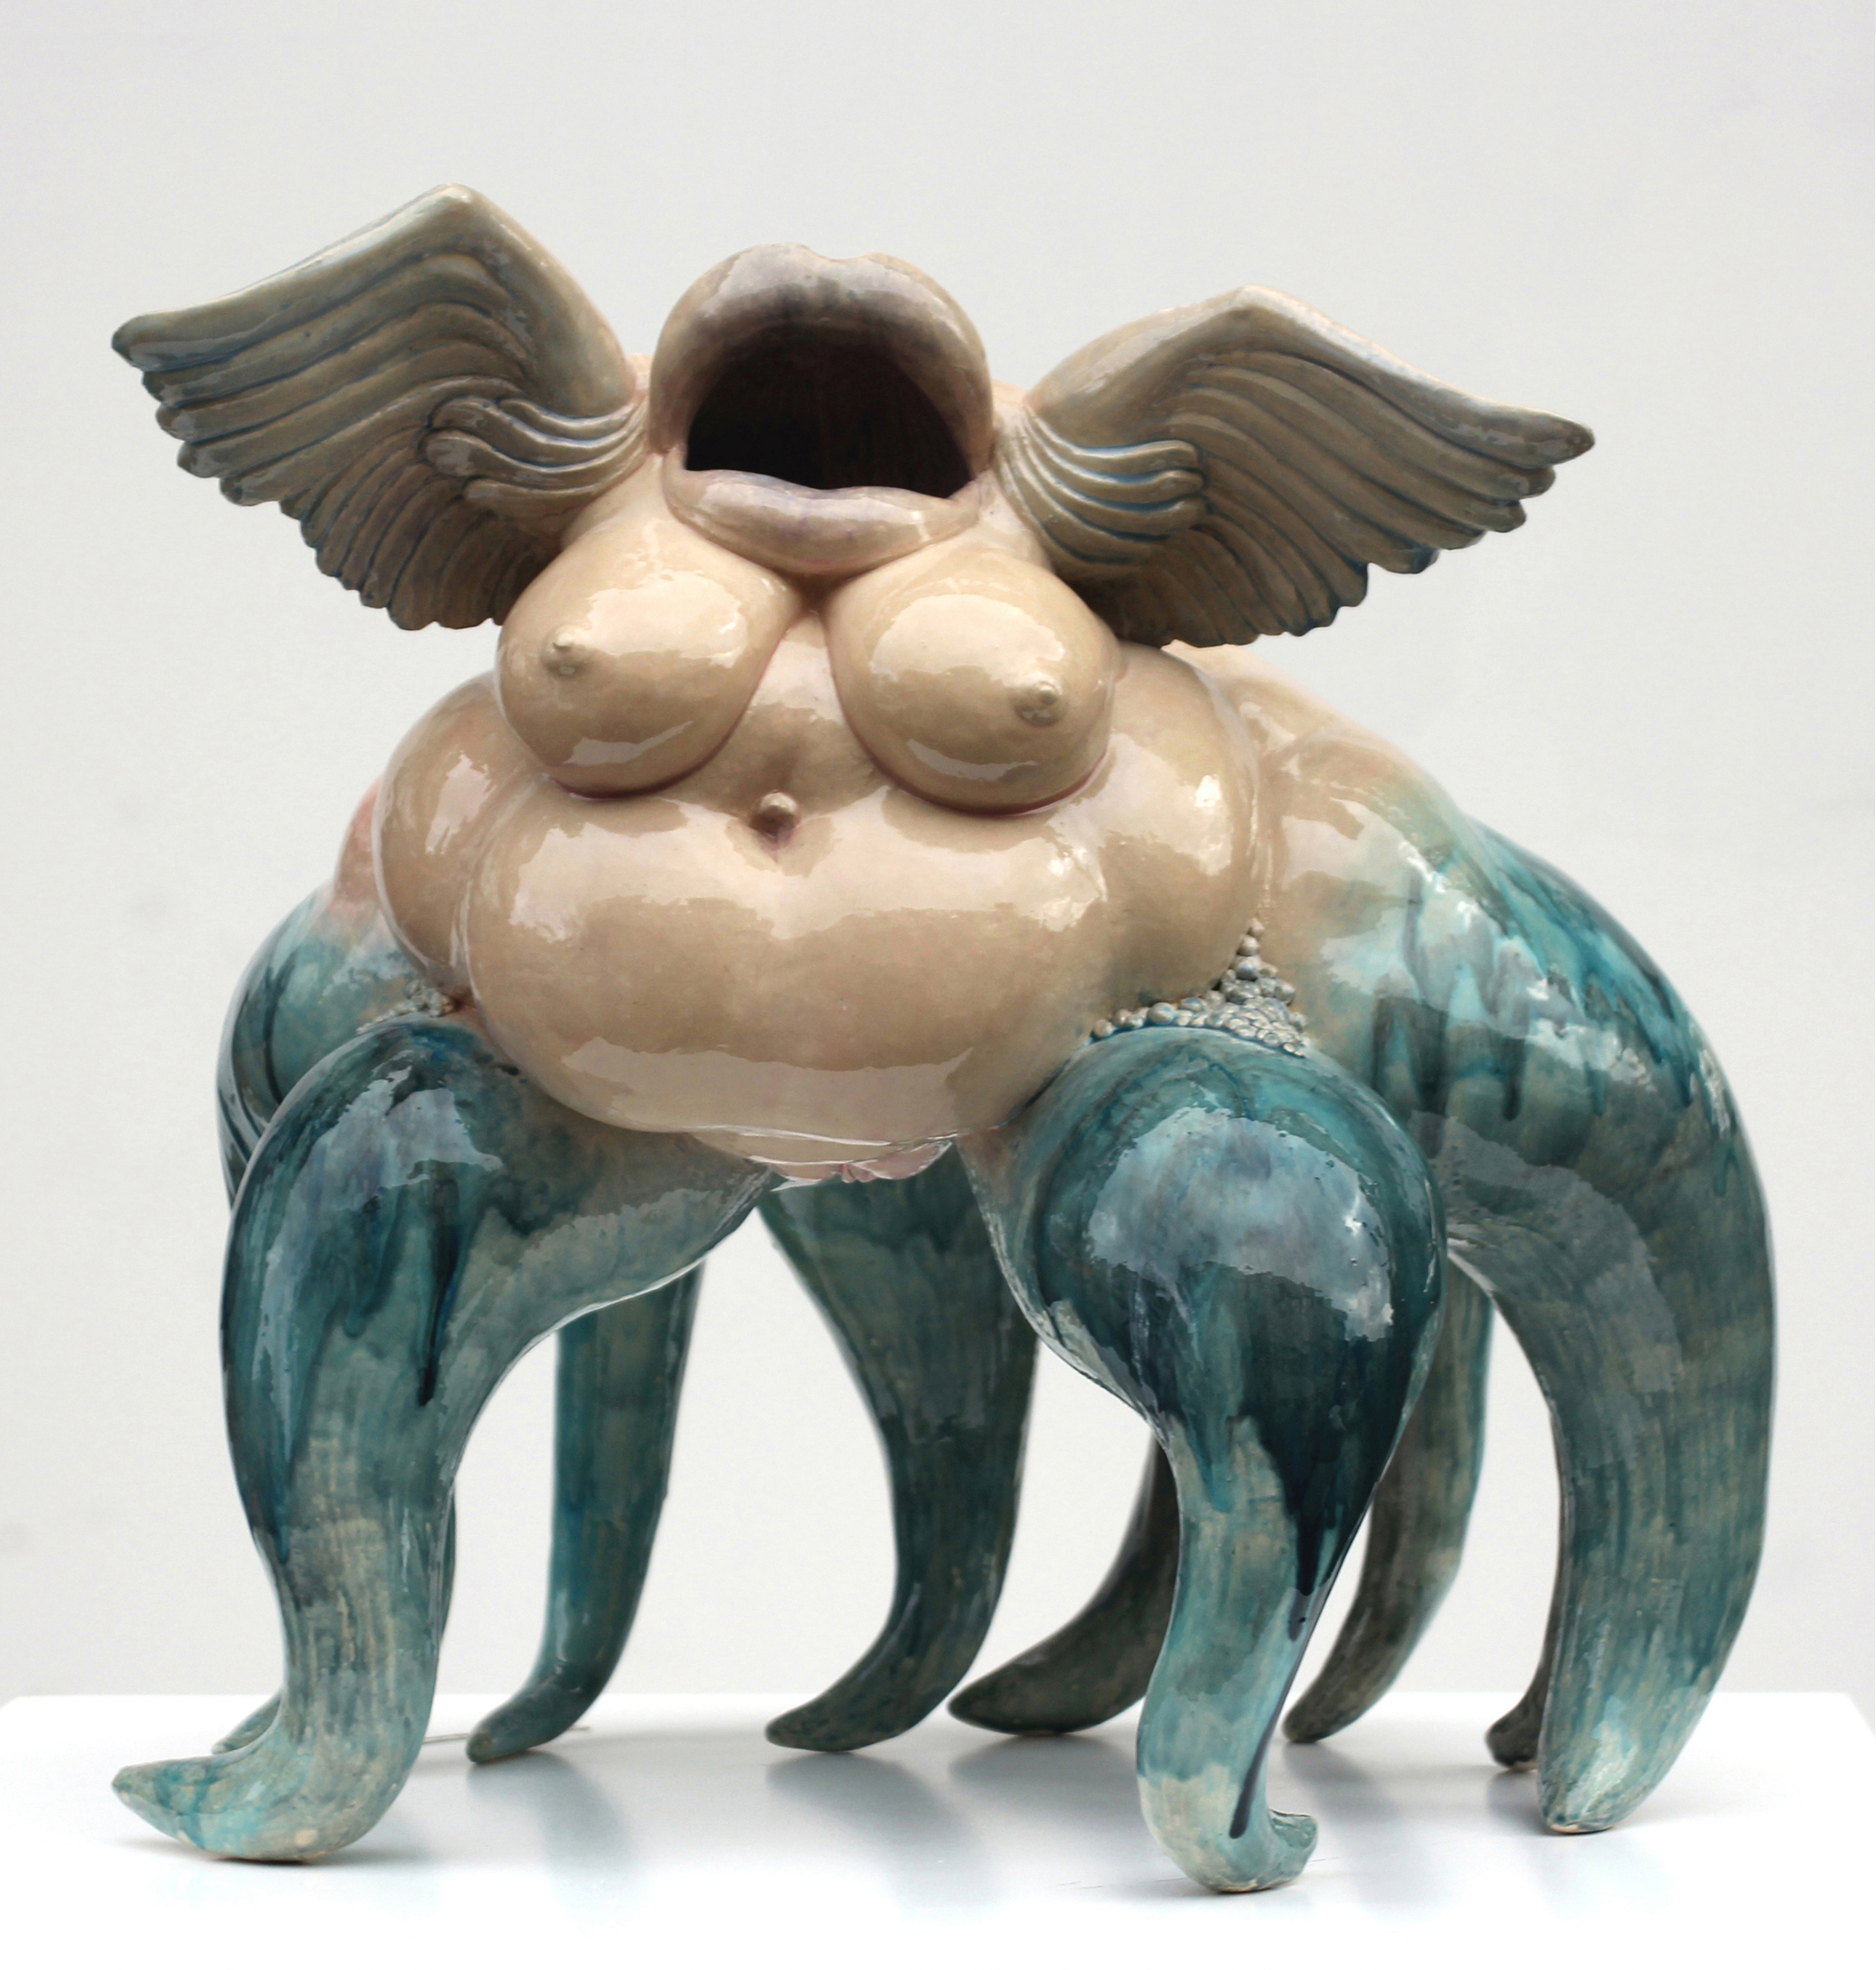 Mixed creature of a voluptuous woman and octopus with wings. Ceramic glazed in skin color and blue-gray